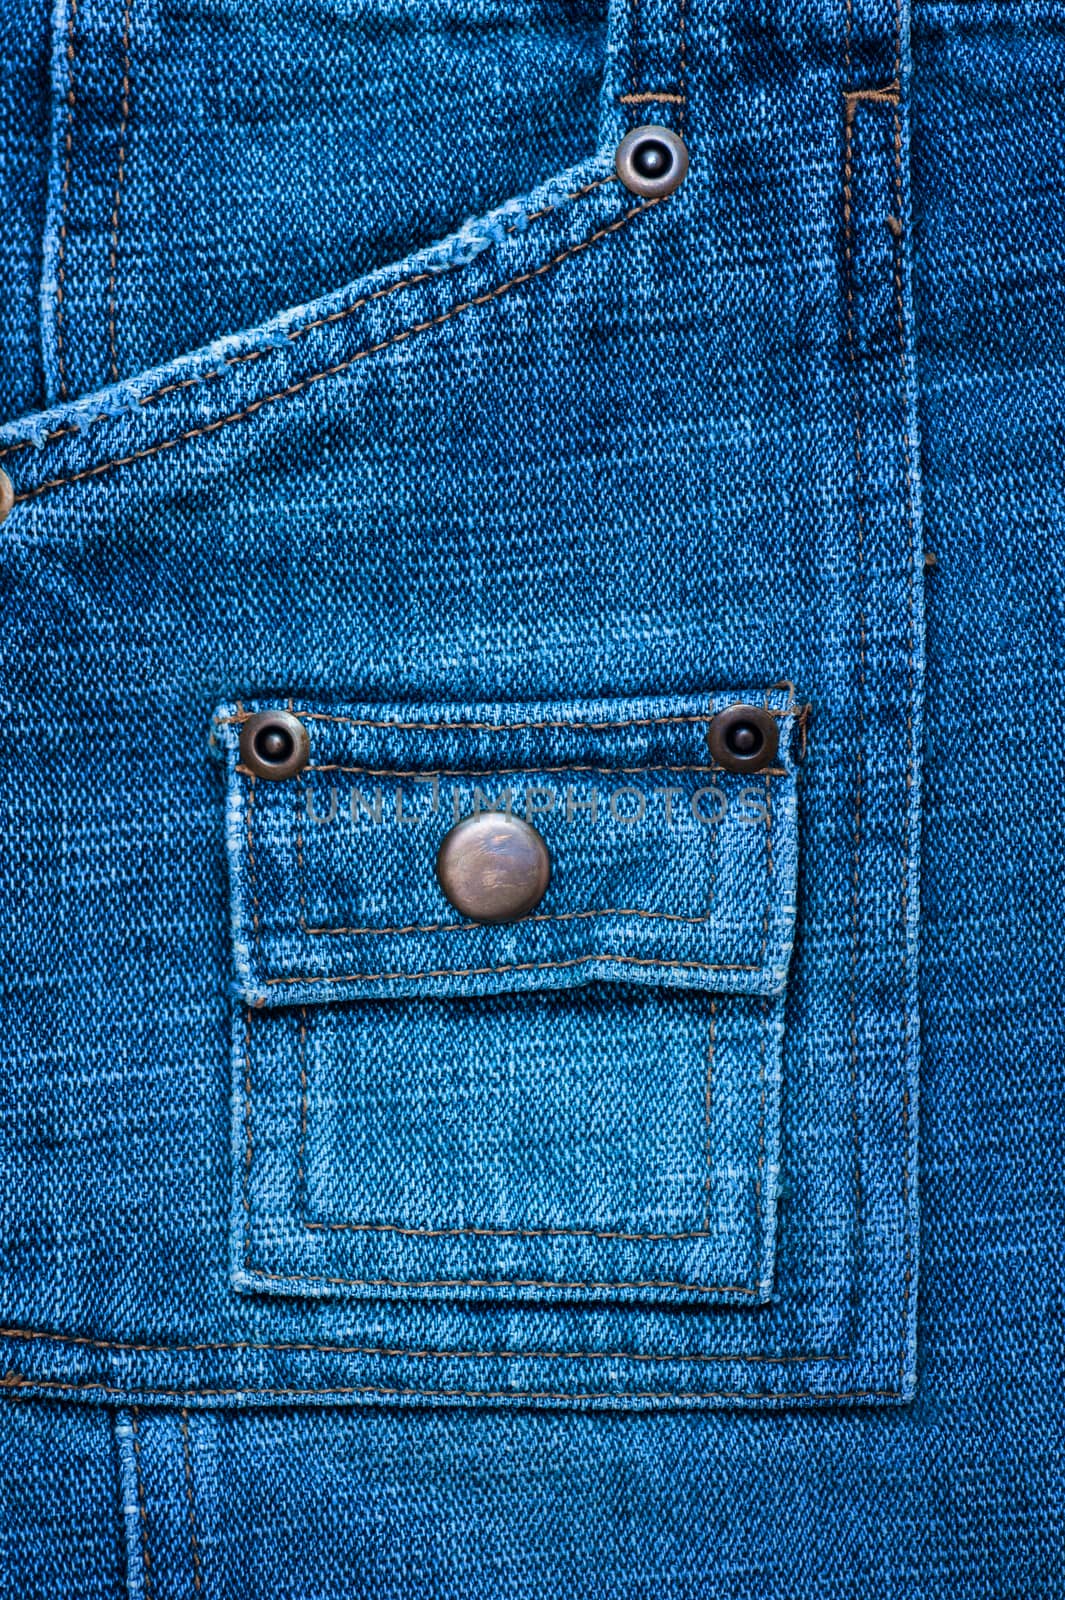 denim texture with rivets for background by timonko